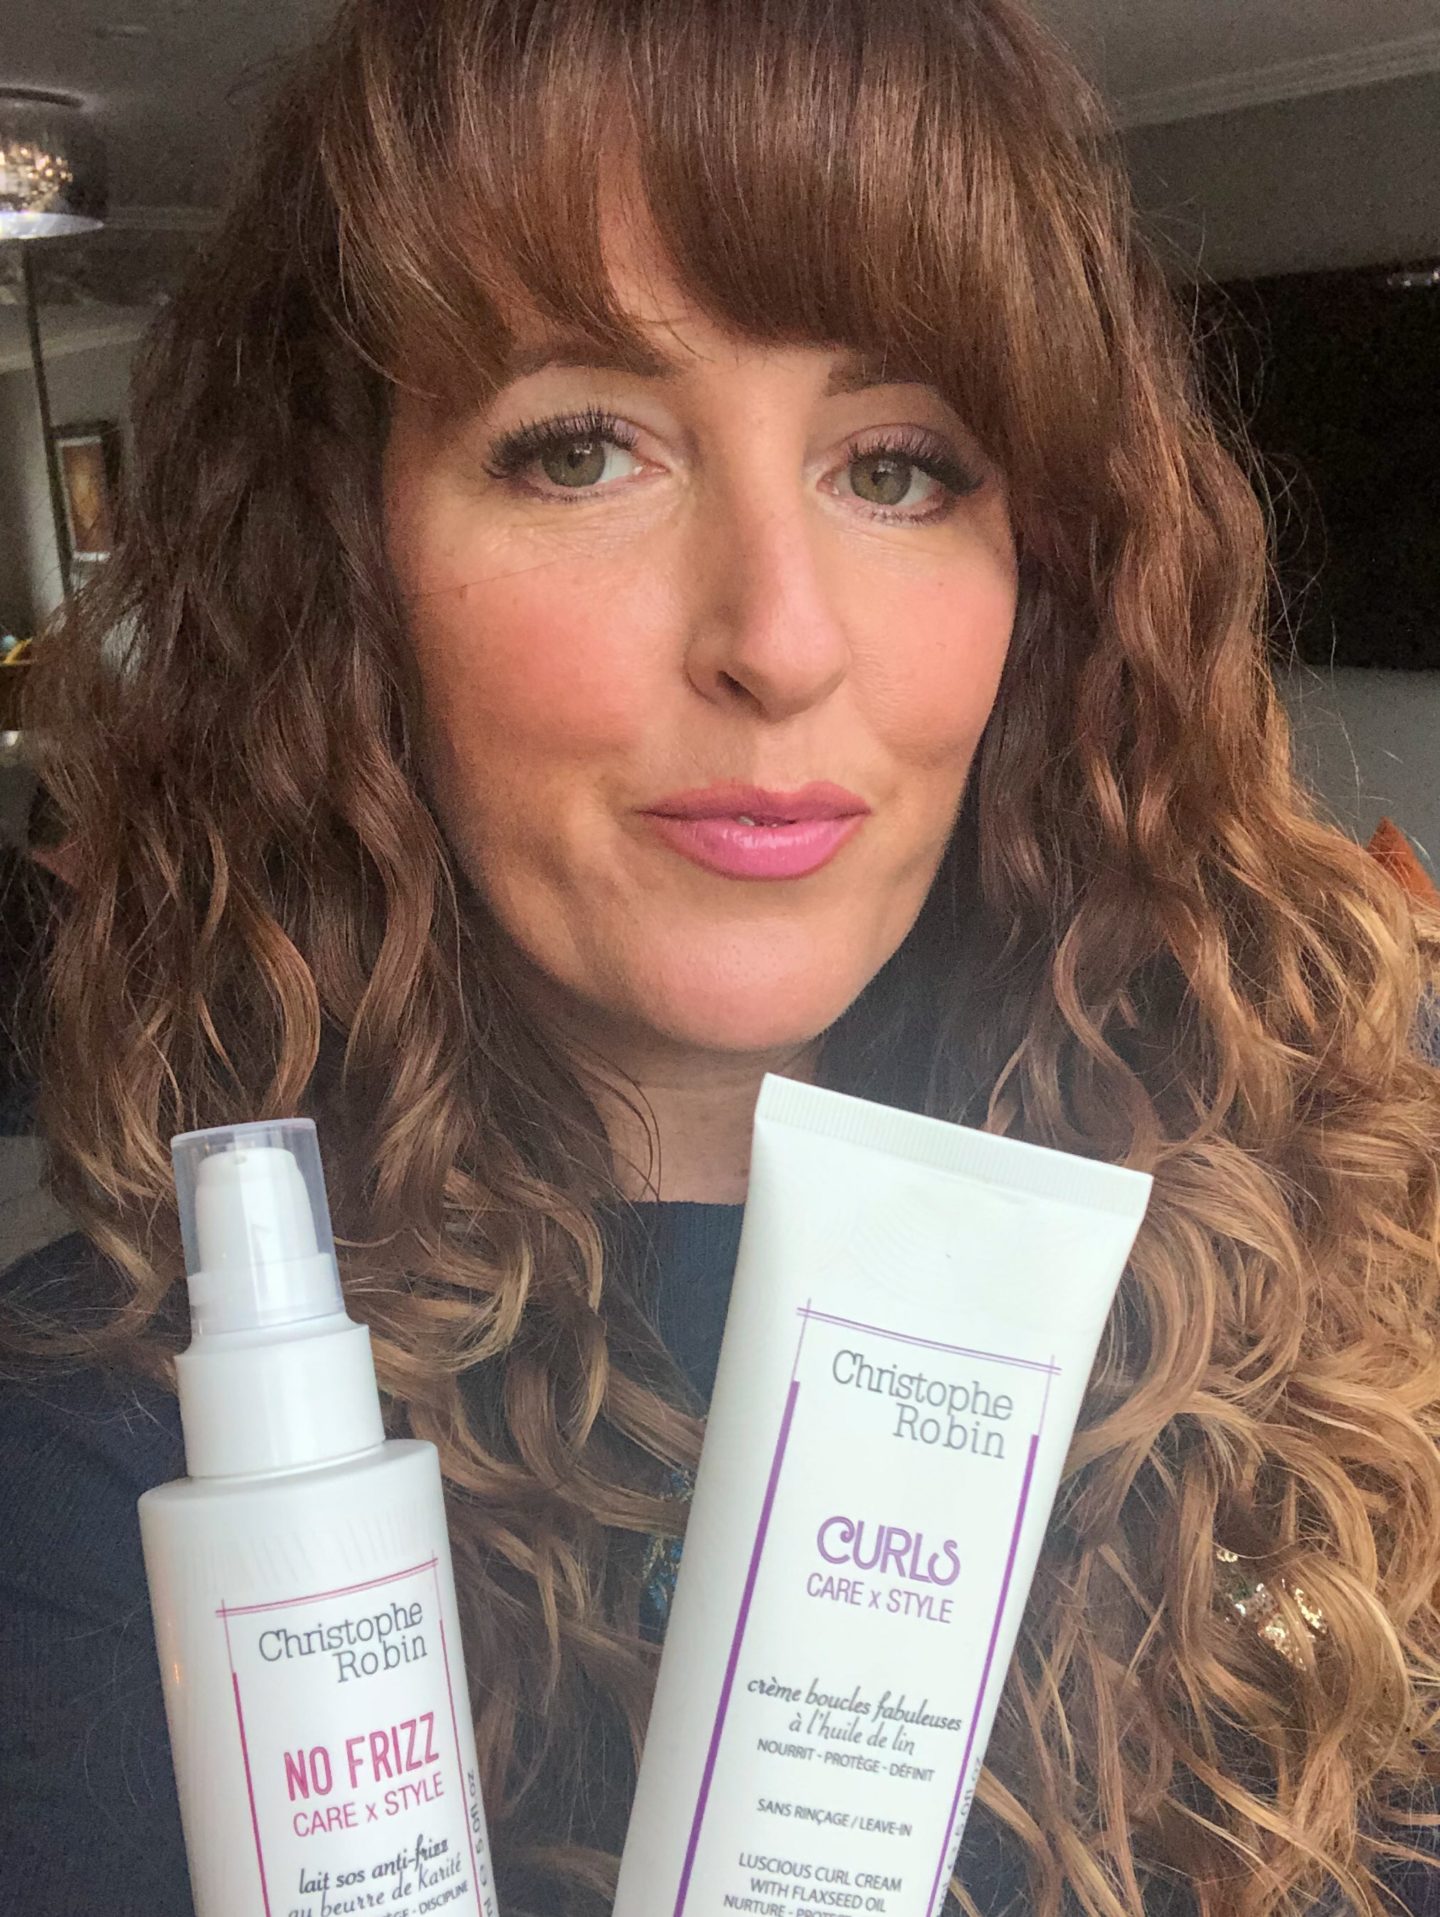 Christophe Robin Curl Cream products are curly girl method approved. Christophe Robin is high end hair care from concentrated natural active ingredients curly girl milk and cream